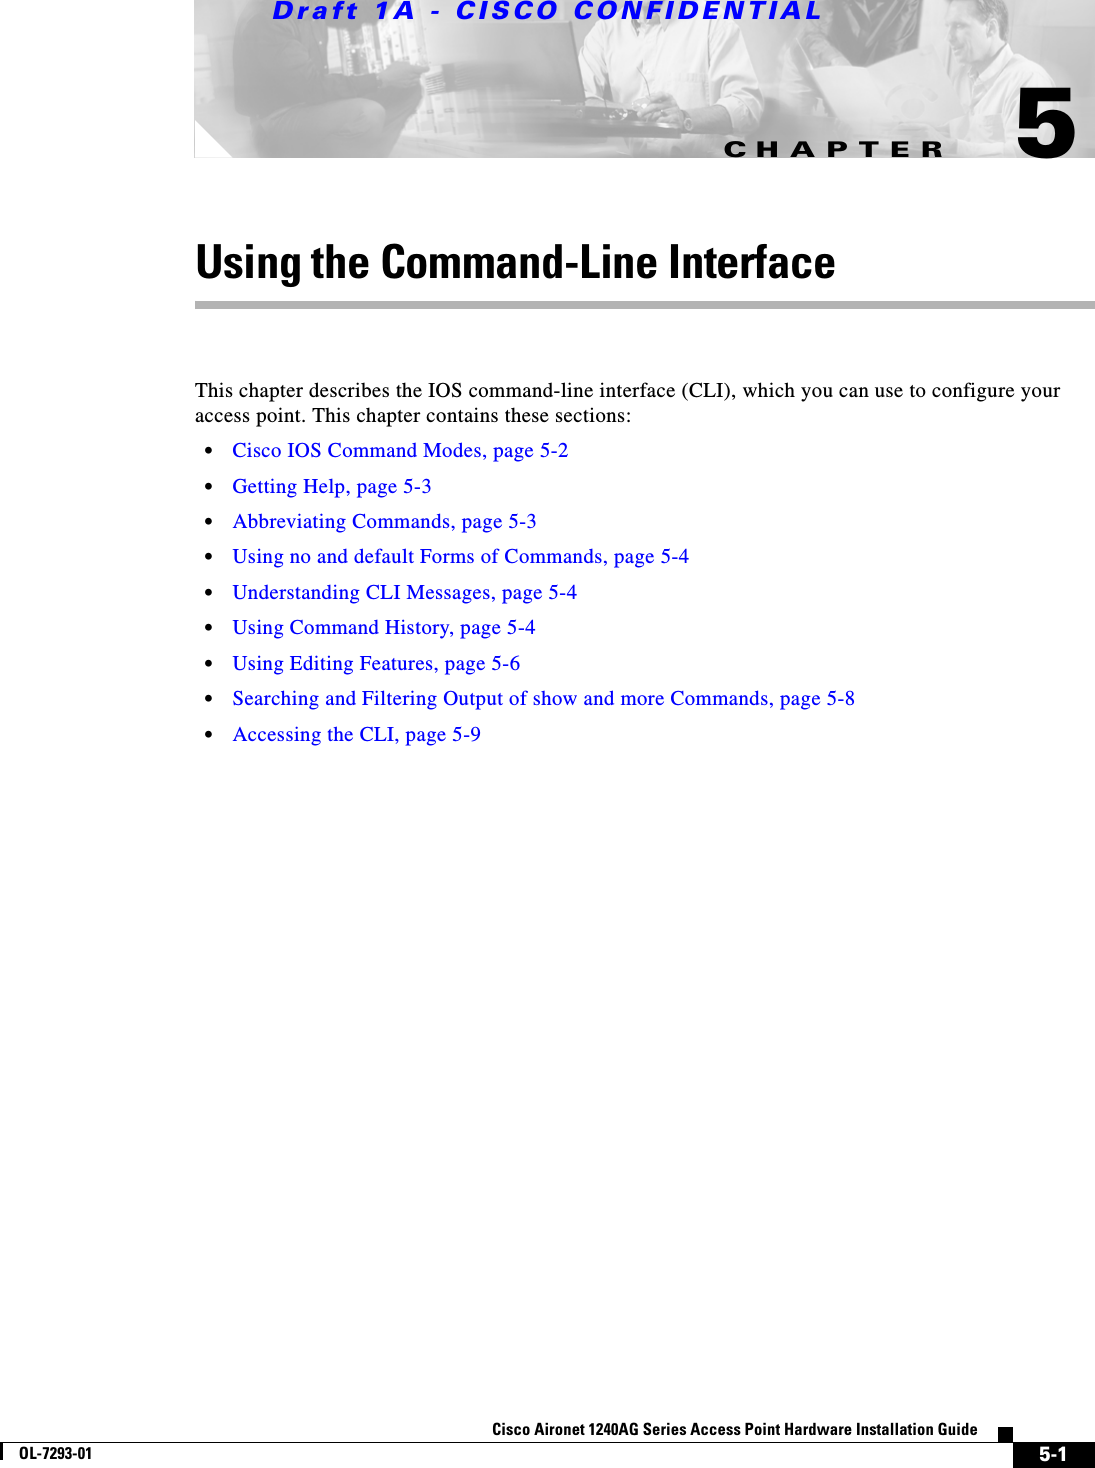 CHAPTERDraft 1A - CISCO CONFIDENTIAL5-1Cisco Aironet 1240AG Series Access Point Hardware Installation GuideOL-7293-015Using the Command-Line InterfaceThis chapter describes the IOS command-line interface (CLI), which you can use to configure your access point. This chapter contains these sections:•Cisco IOS Command Modes, page 5-2•Getting Help, page 5-3•Abbreviating Commands, page 5-3•Using no and default Forms of Commands, page 5-4•Understanding CLI Messages, page 5-4•Using Command History, page 5-4•Using Editing Features, page 5-6•Searching and Filtering Output of show and more Commands, page 5-8•Accessing the CLI, page 5-9